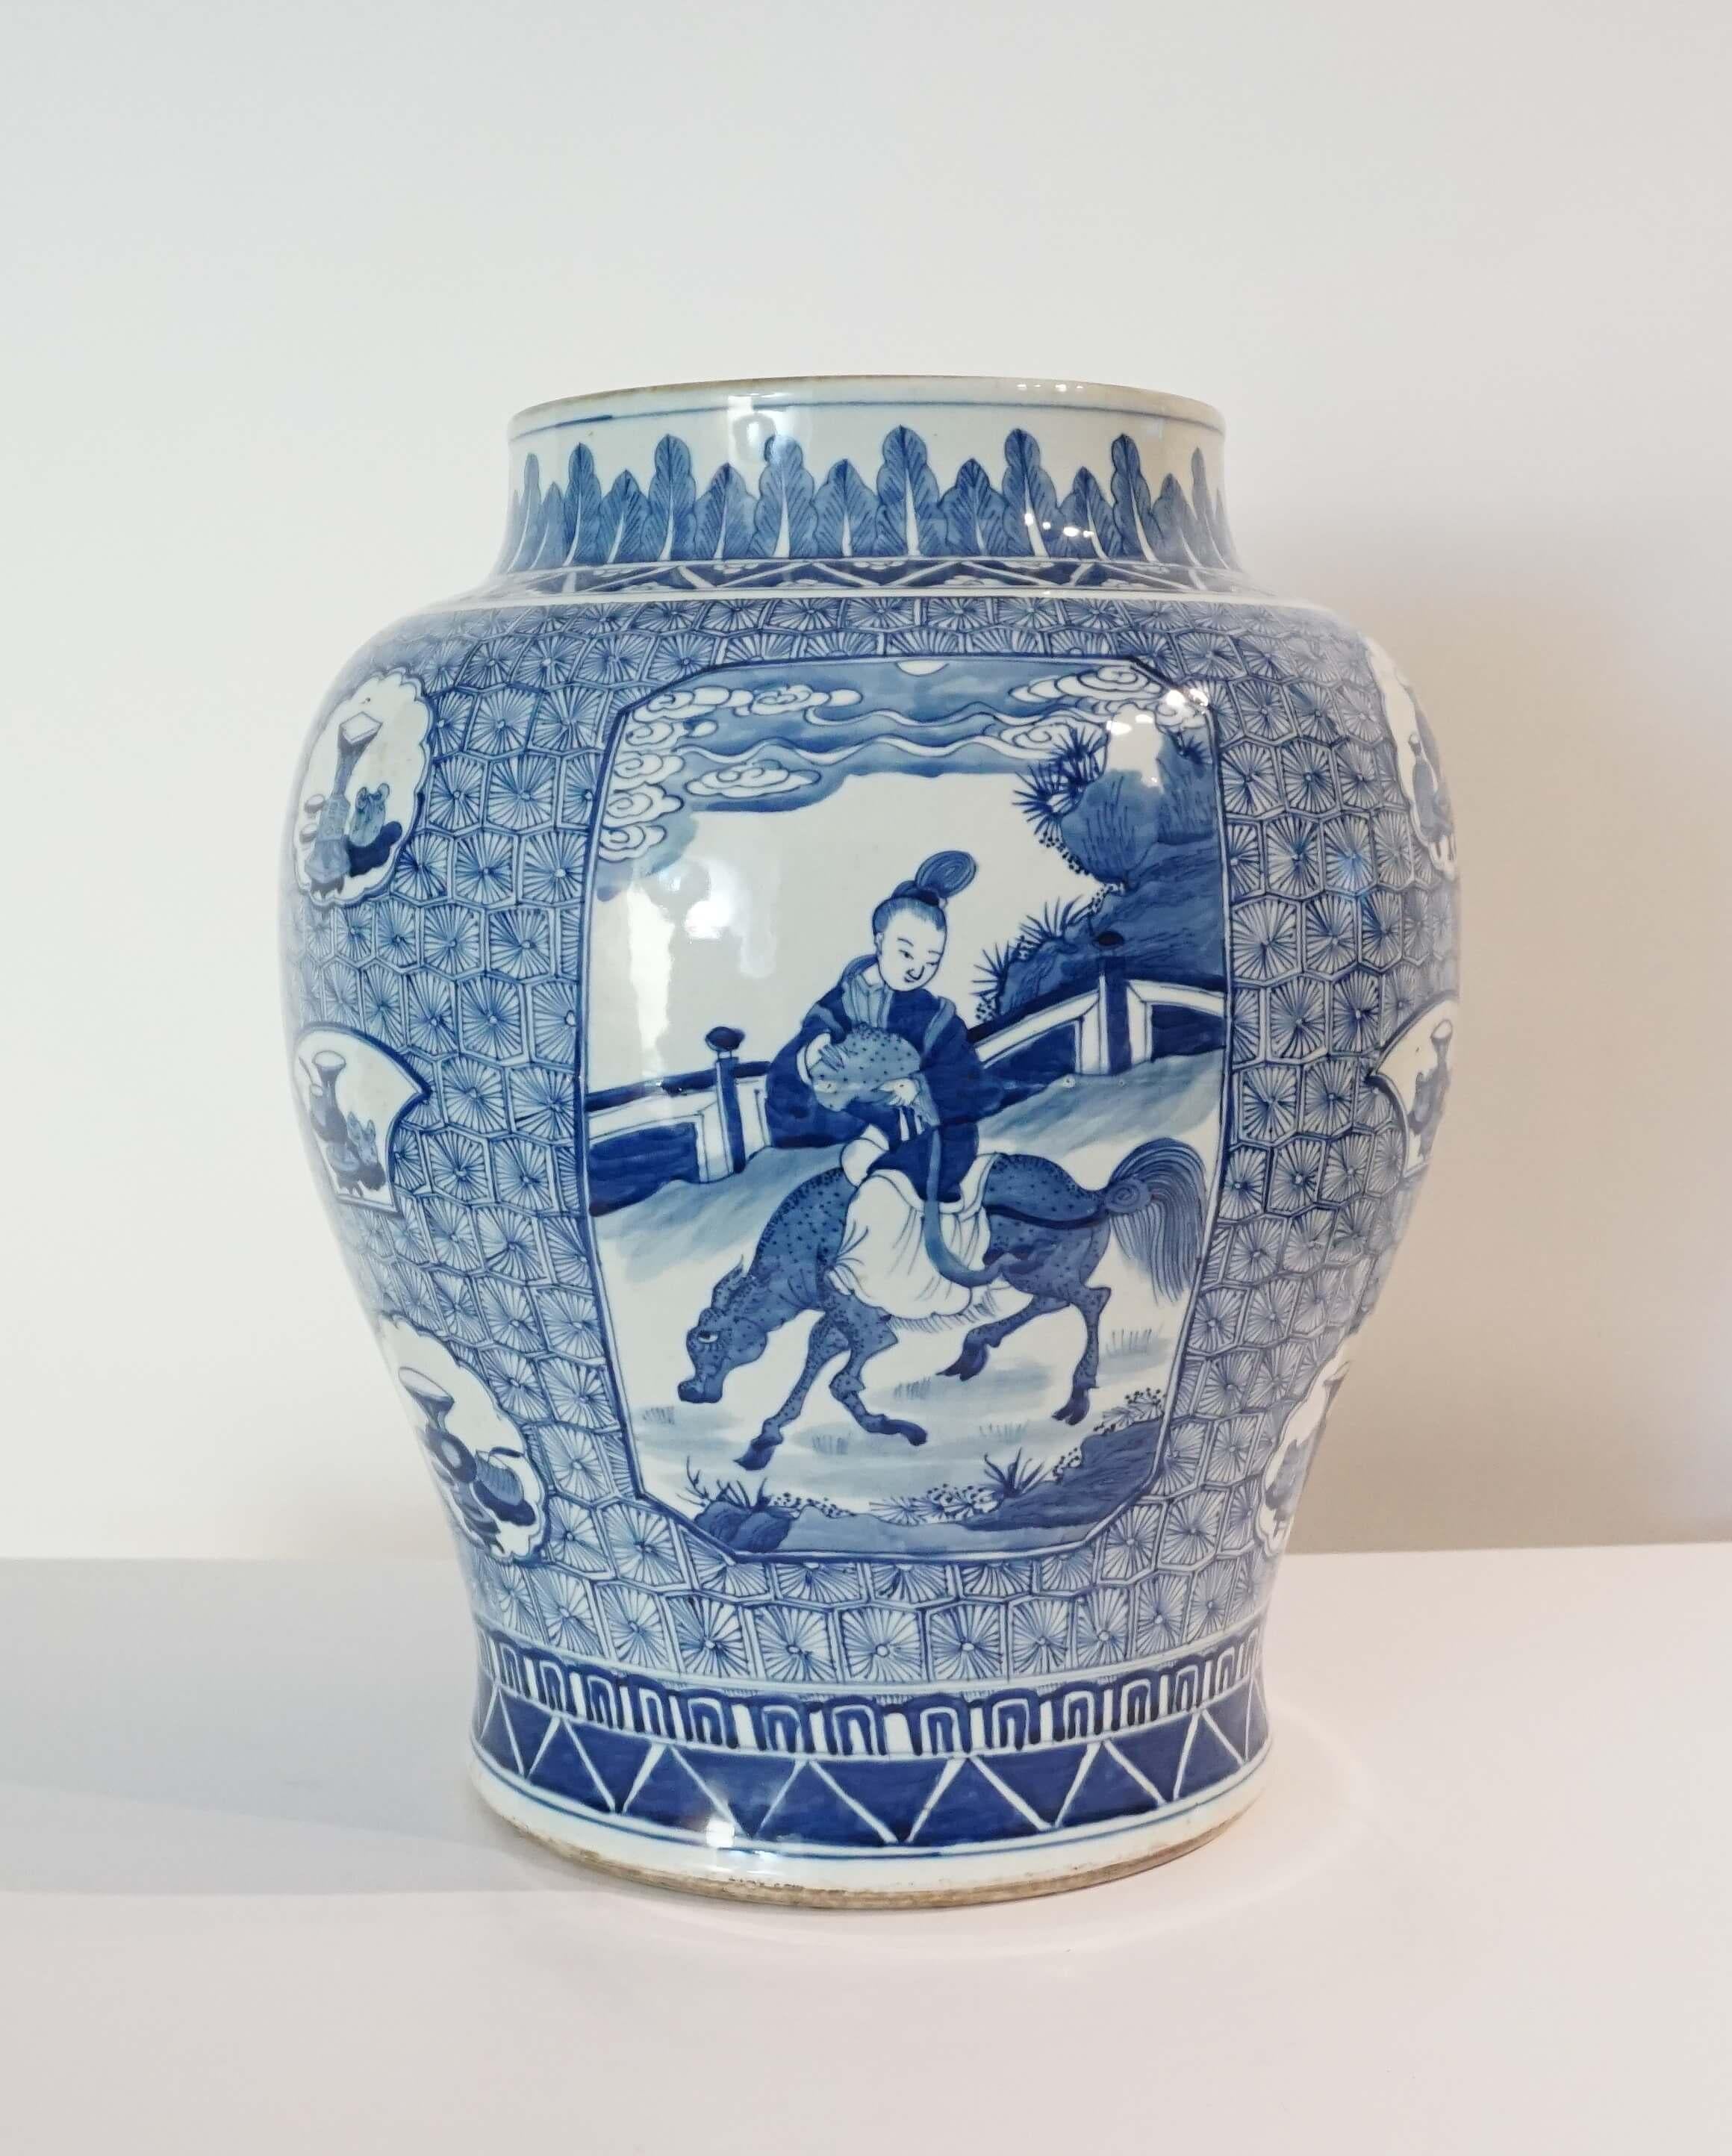 A Chinese Qing dynasty (1644-1912) large broad-shouldered baluster jar vase having all-over underglaze blue figural, foliate, geometric, and panel designs in Kangxi-style now with removable giltwood vase cap French-wired and mounted with solid brass